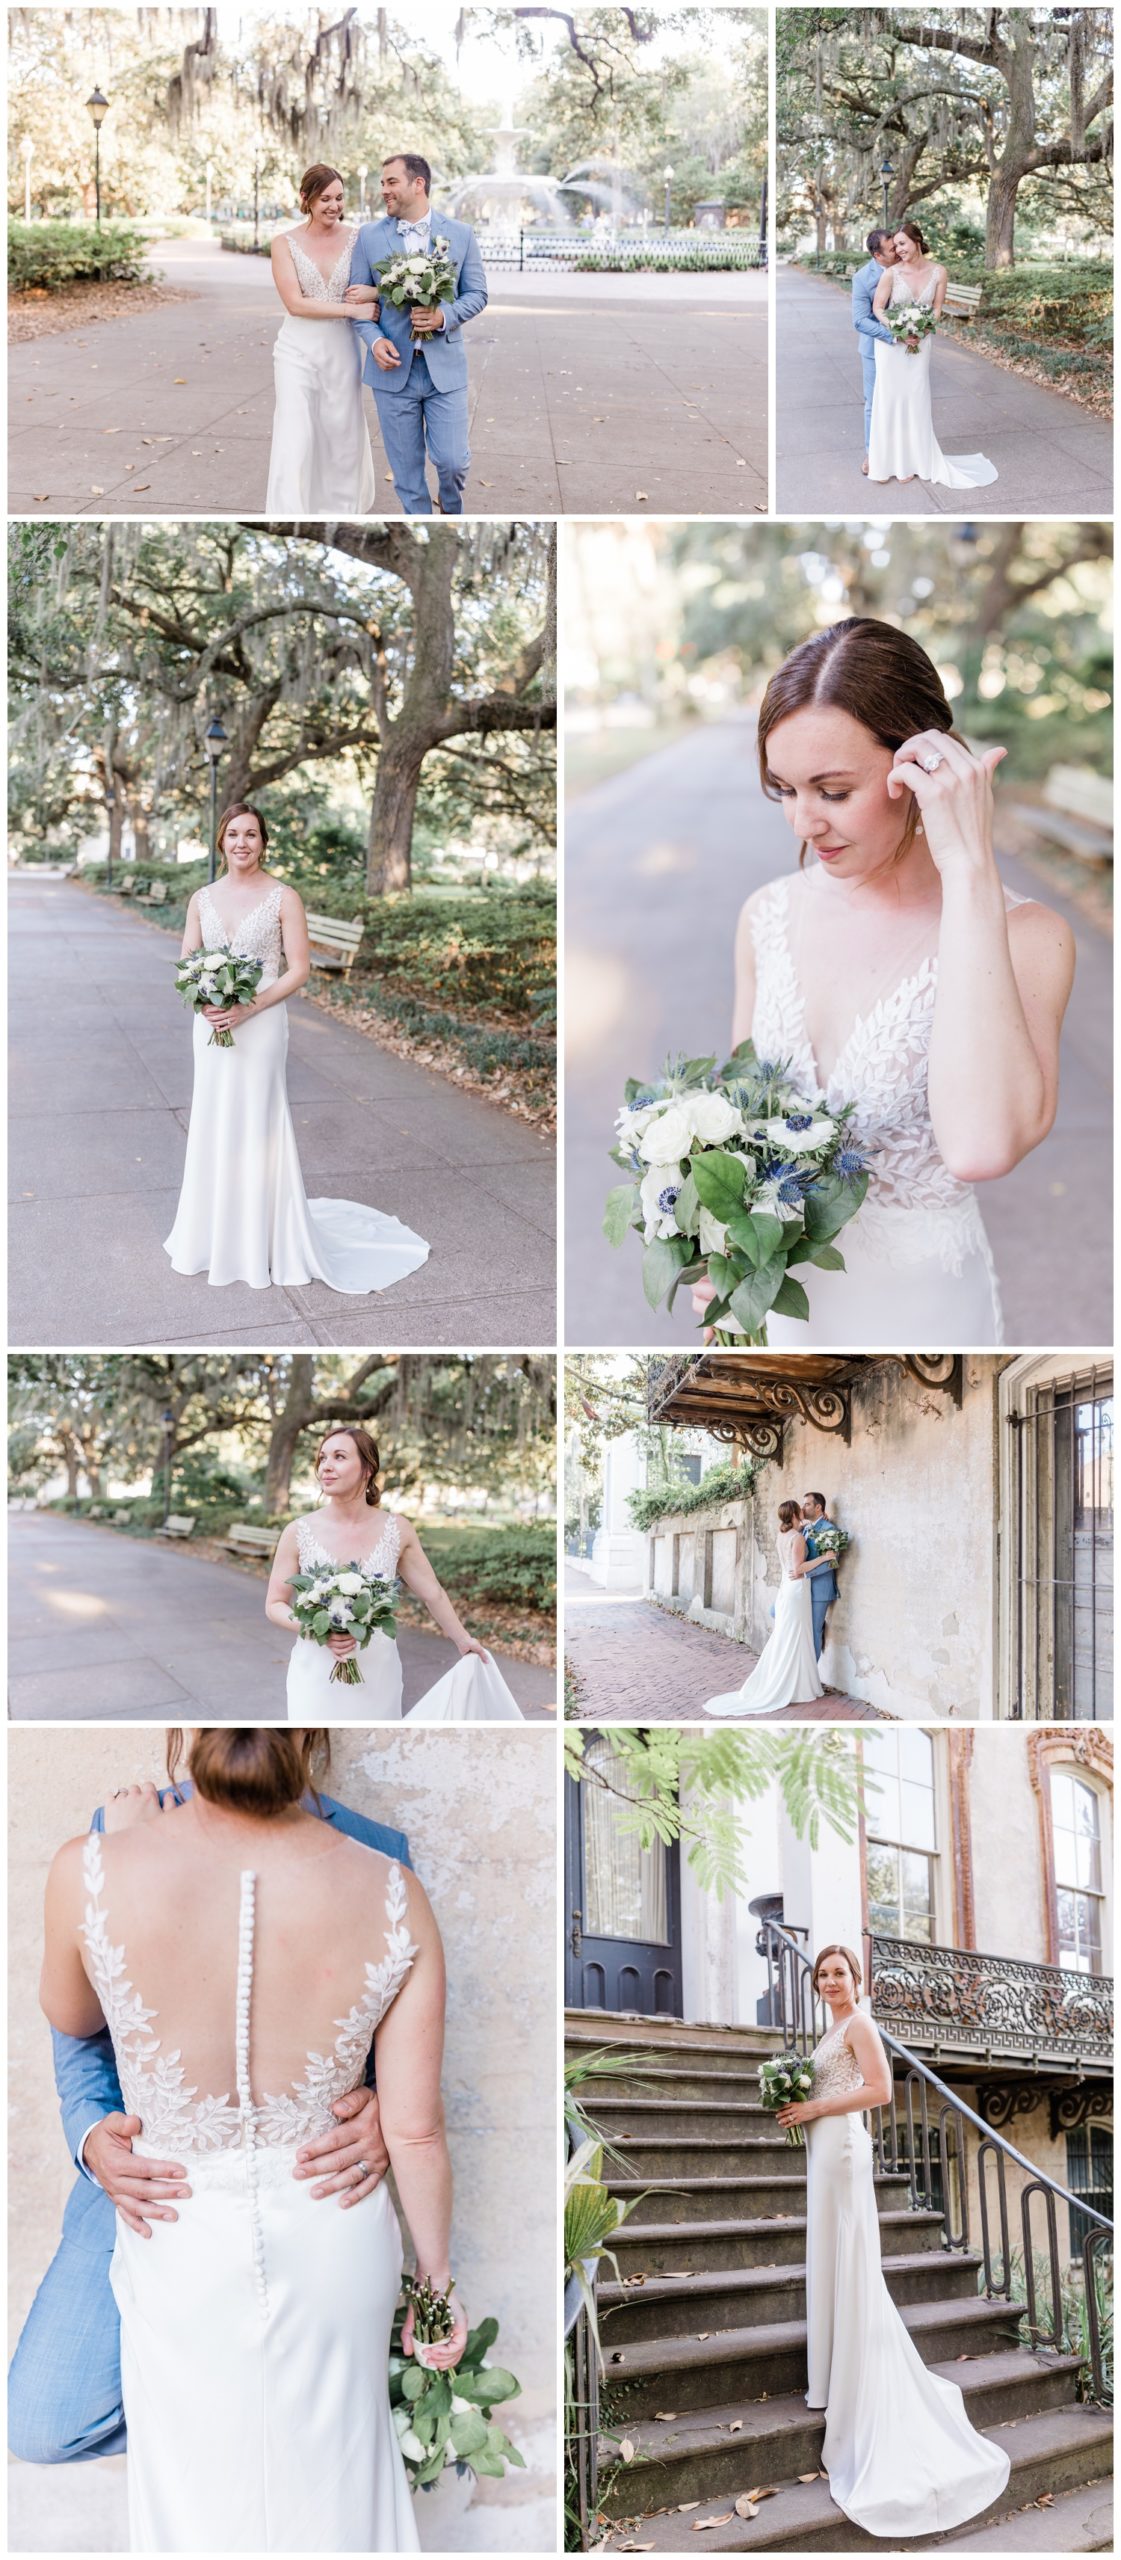 hair and makeup by royal makeup and hair - Classic Elopement in Forsyth Park - flowers by ivory and beau